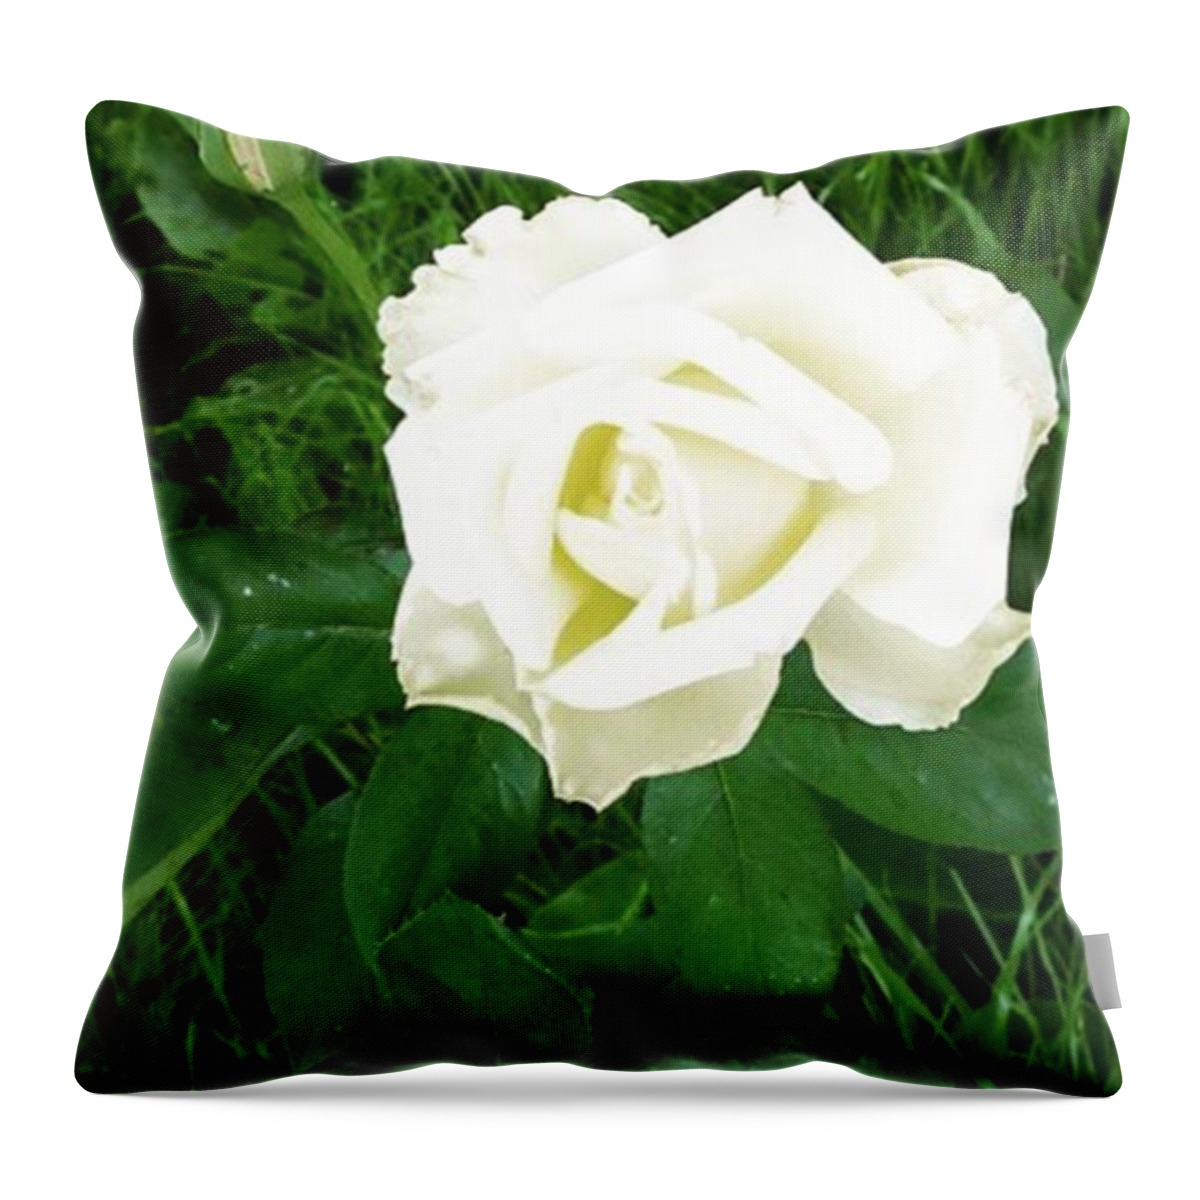 American Beauty Throw Pillow featuring the photograph American Beauty Rose by Kayla Hopkins